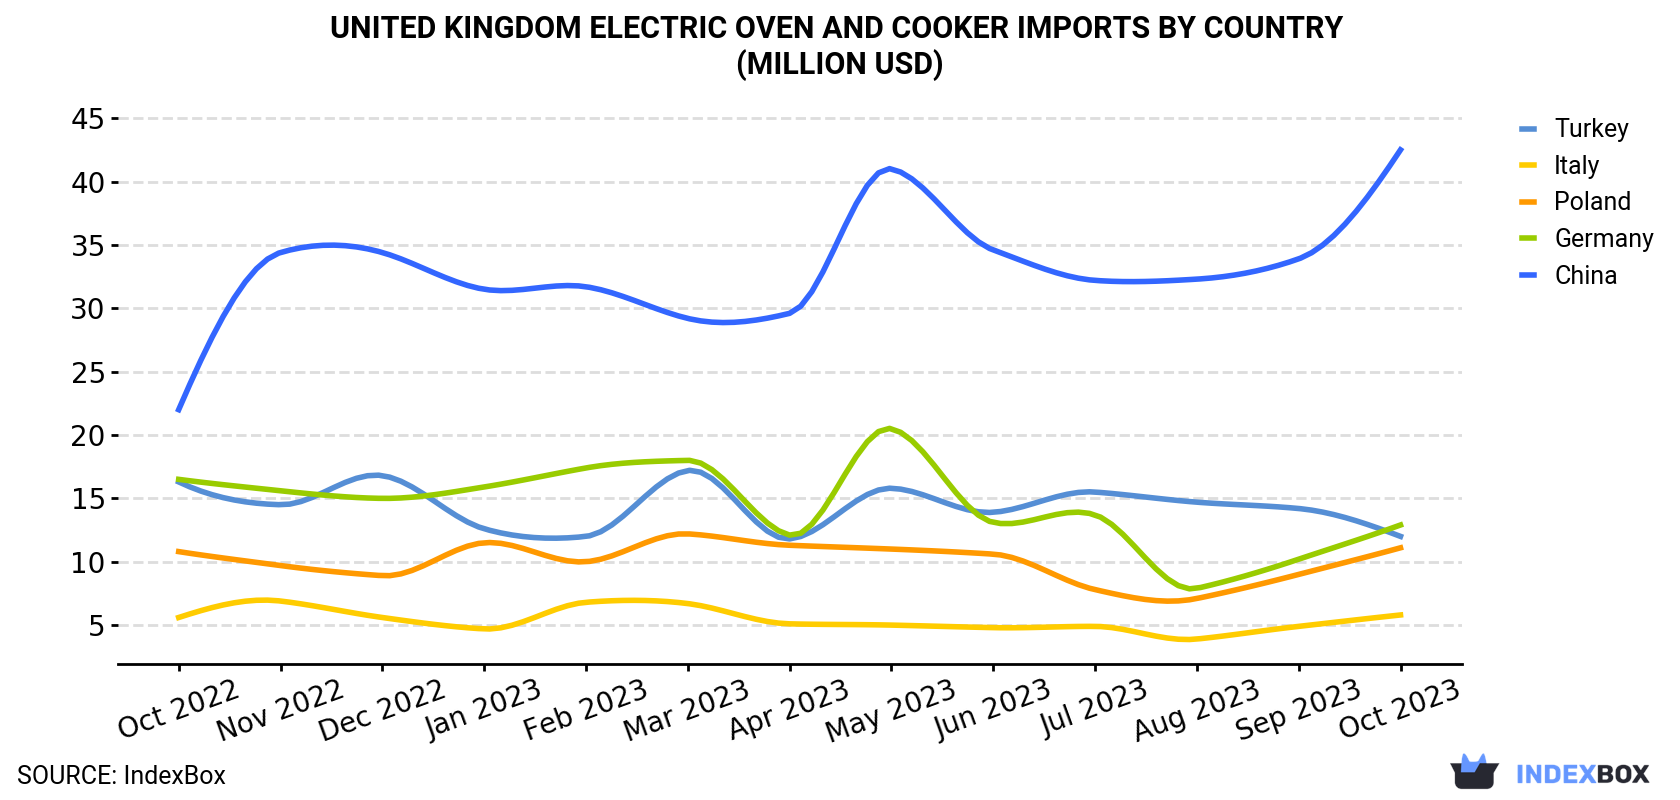 United Kingdom Electric Oven And Cooker Imports By Country (Million USD)